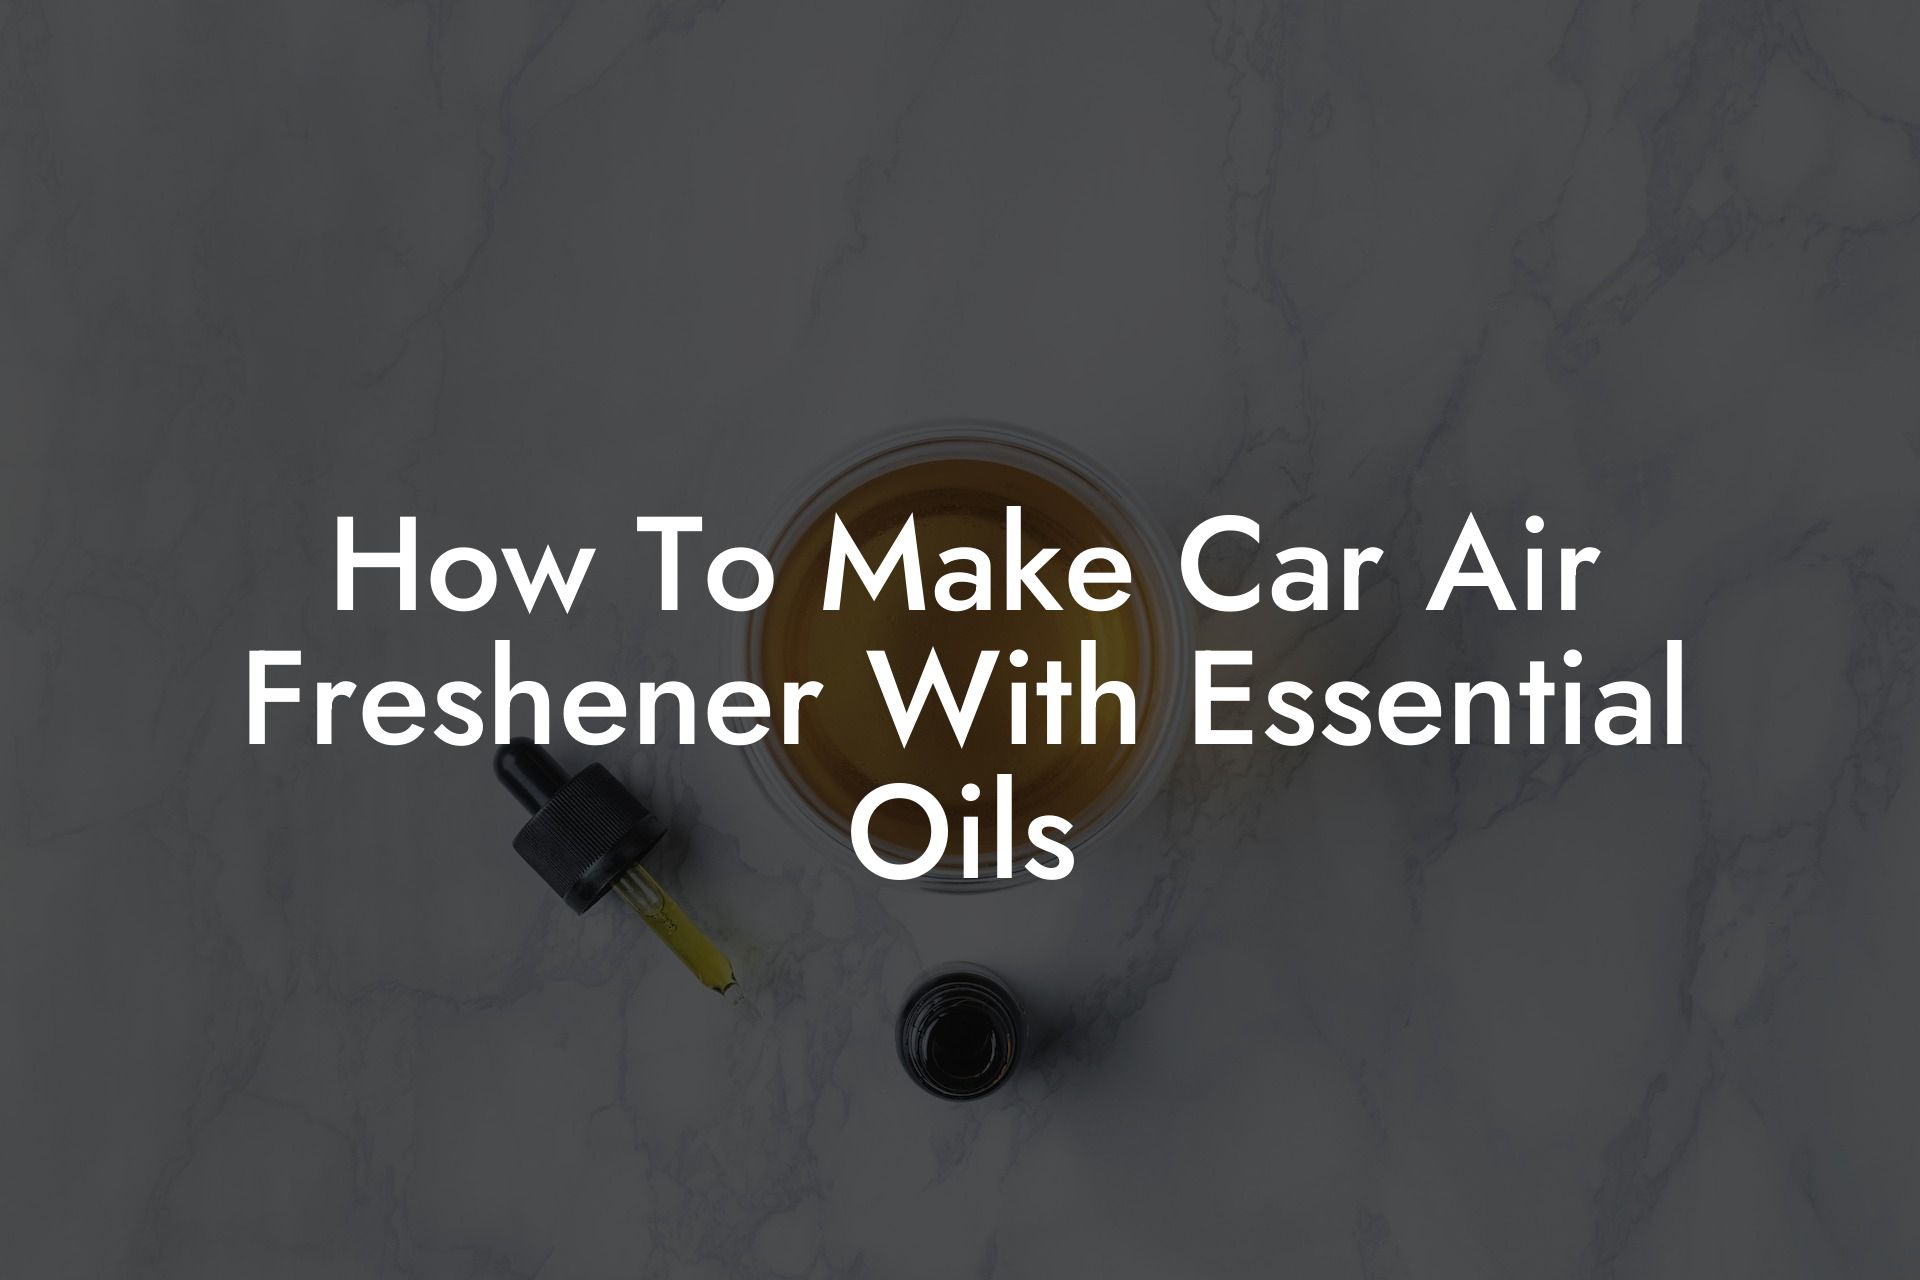 How To Make Car Air Freshener With Essential Oils